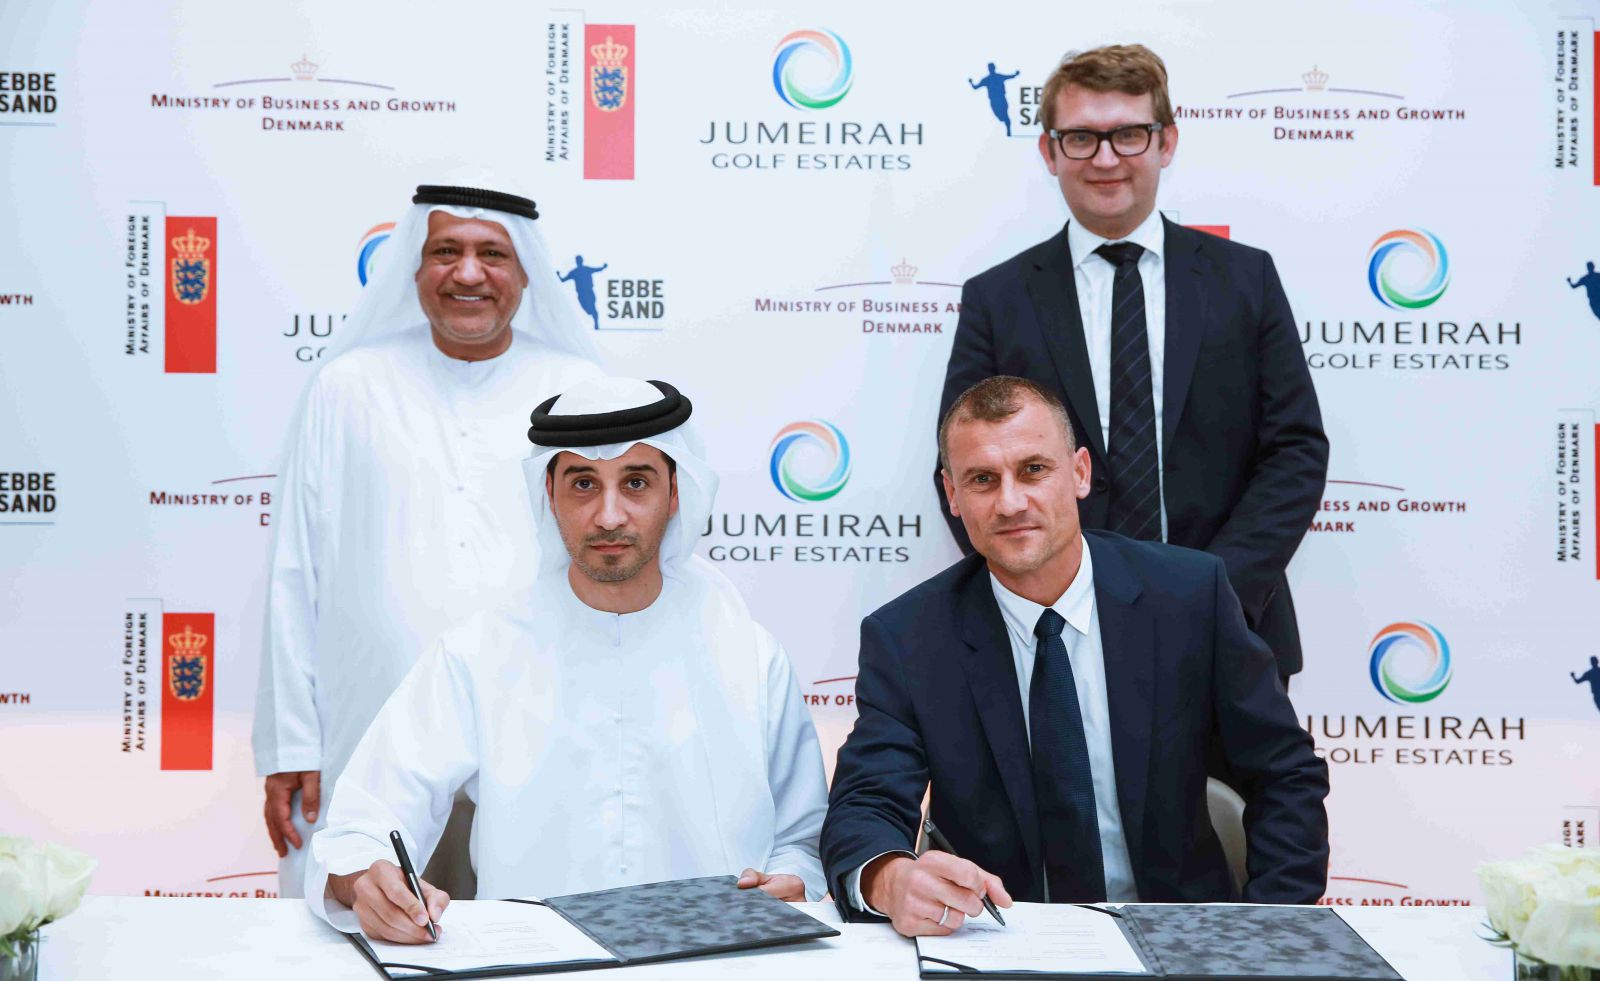 World's First Sustainable Sports Hub by Ebbe Sand to be developed at Jumeirah Golf Estates